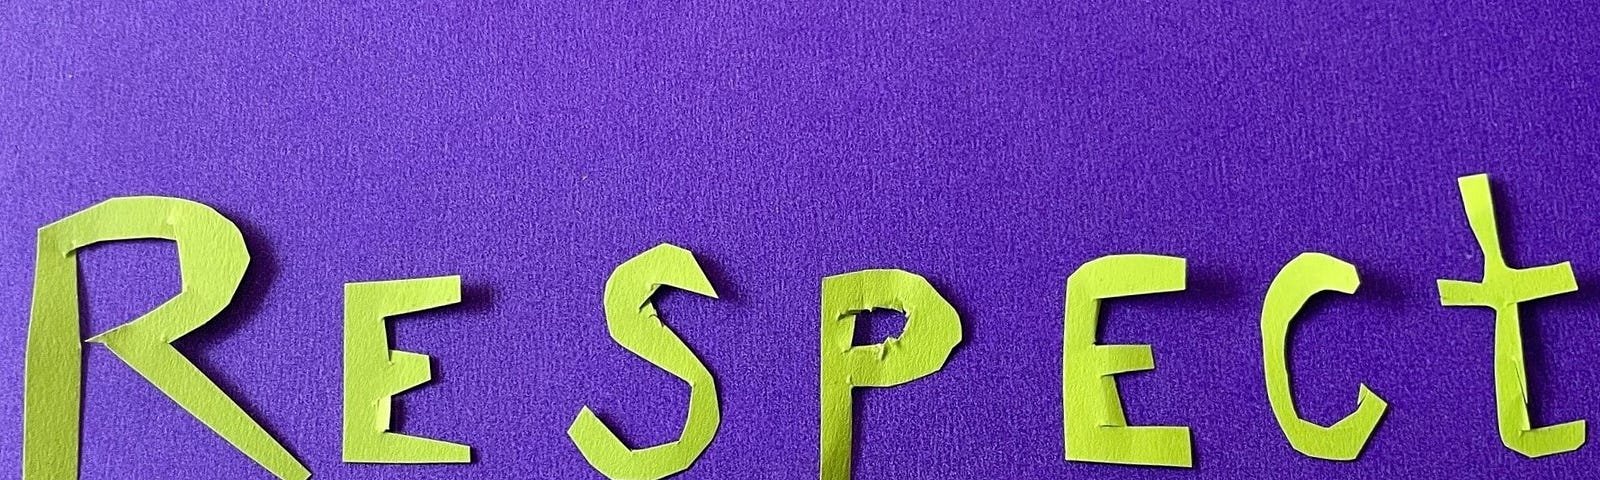 The word “Respect” cut from green paper and laid on a purple background.